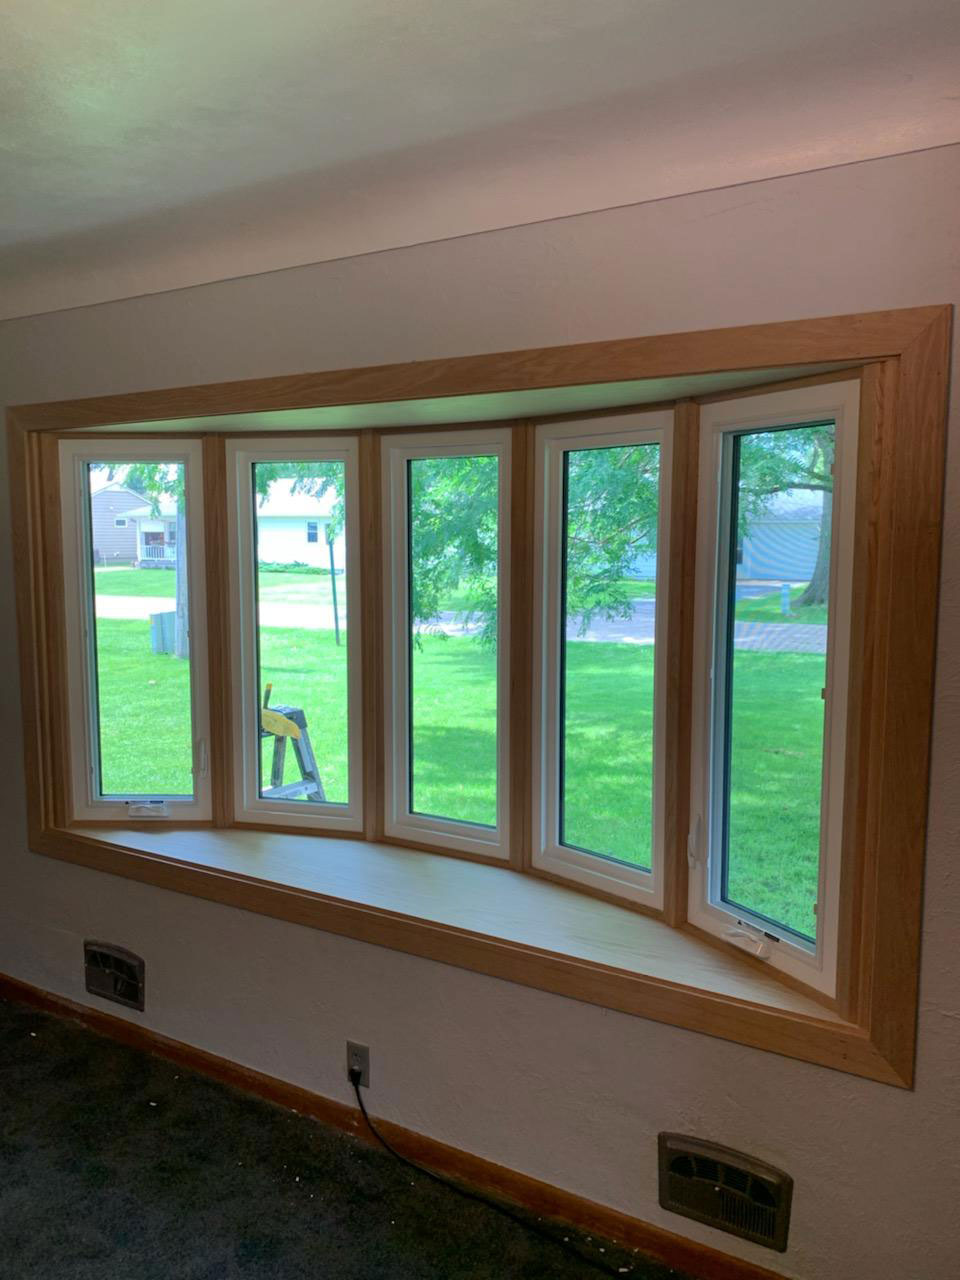 Do You Need Window Replacements?